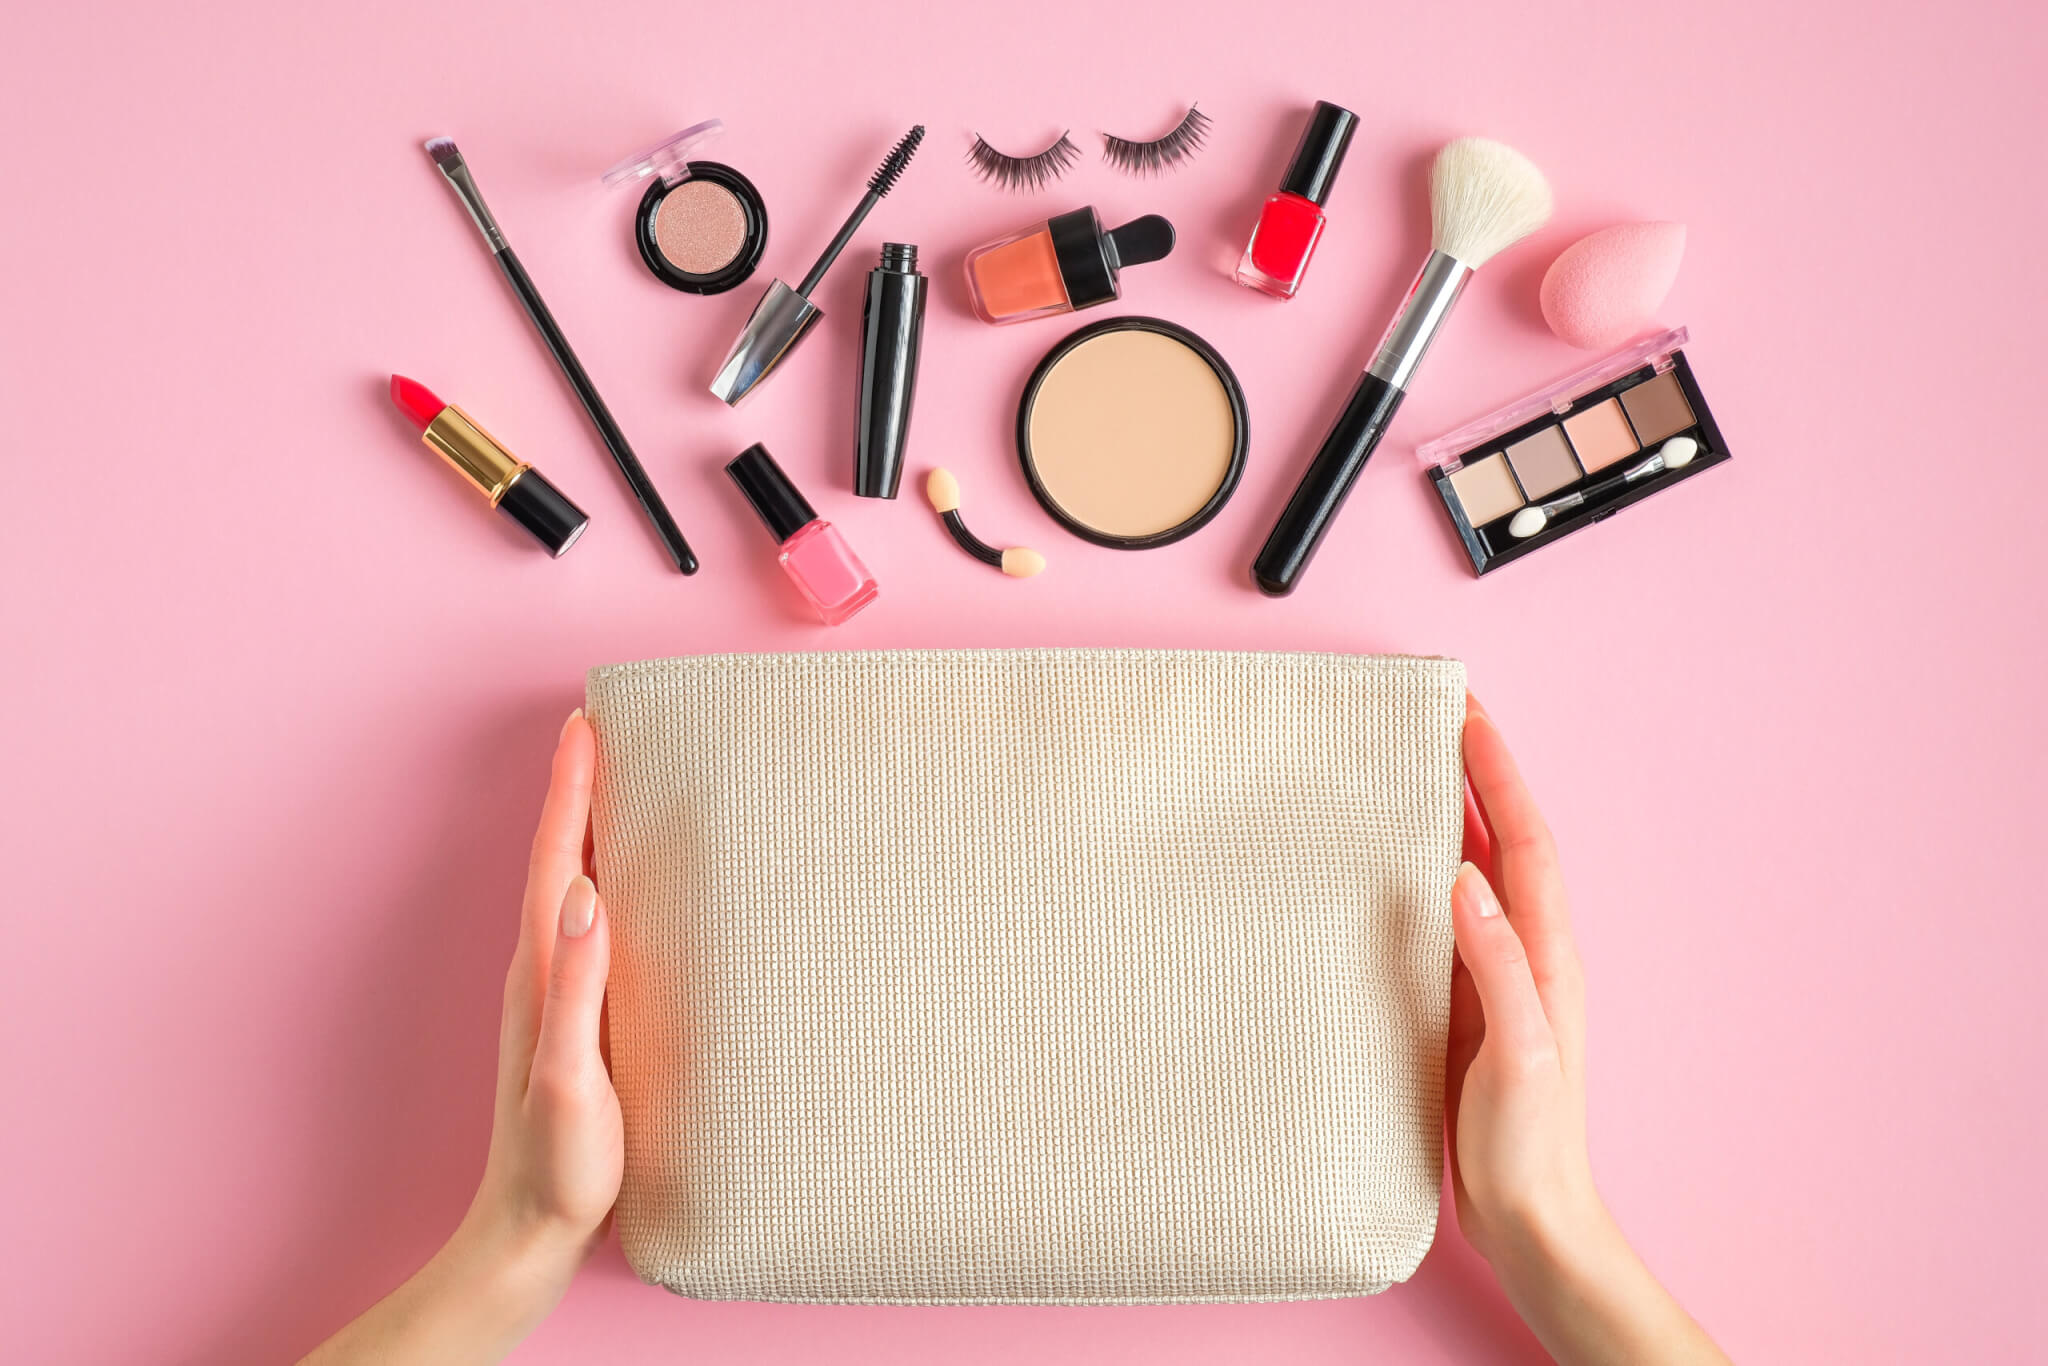 Female hands holding makeup bag with cosmetic beauty products